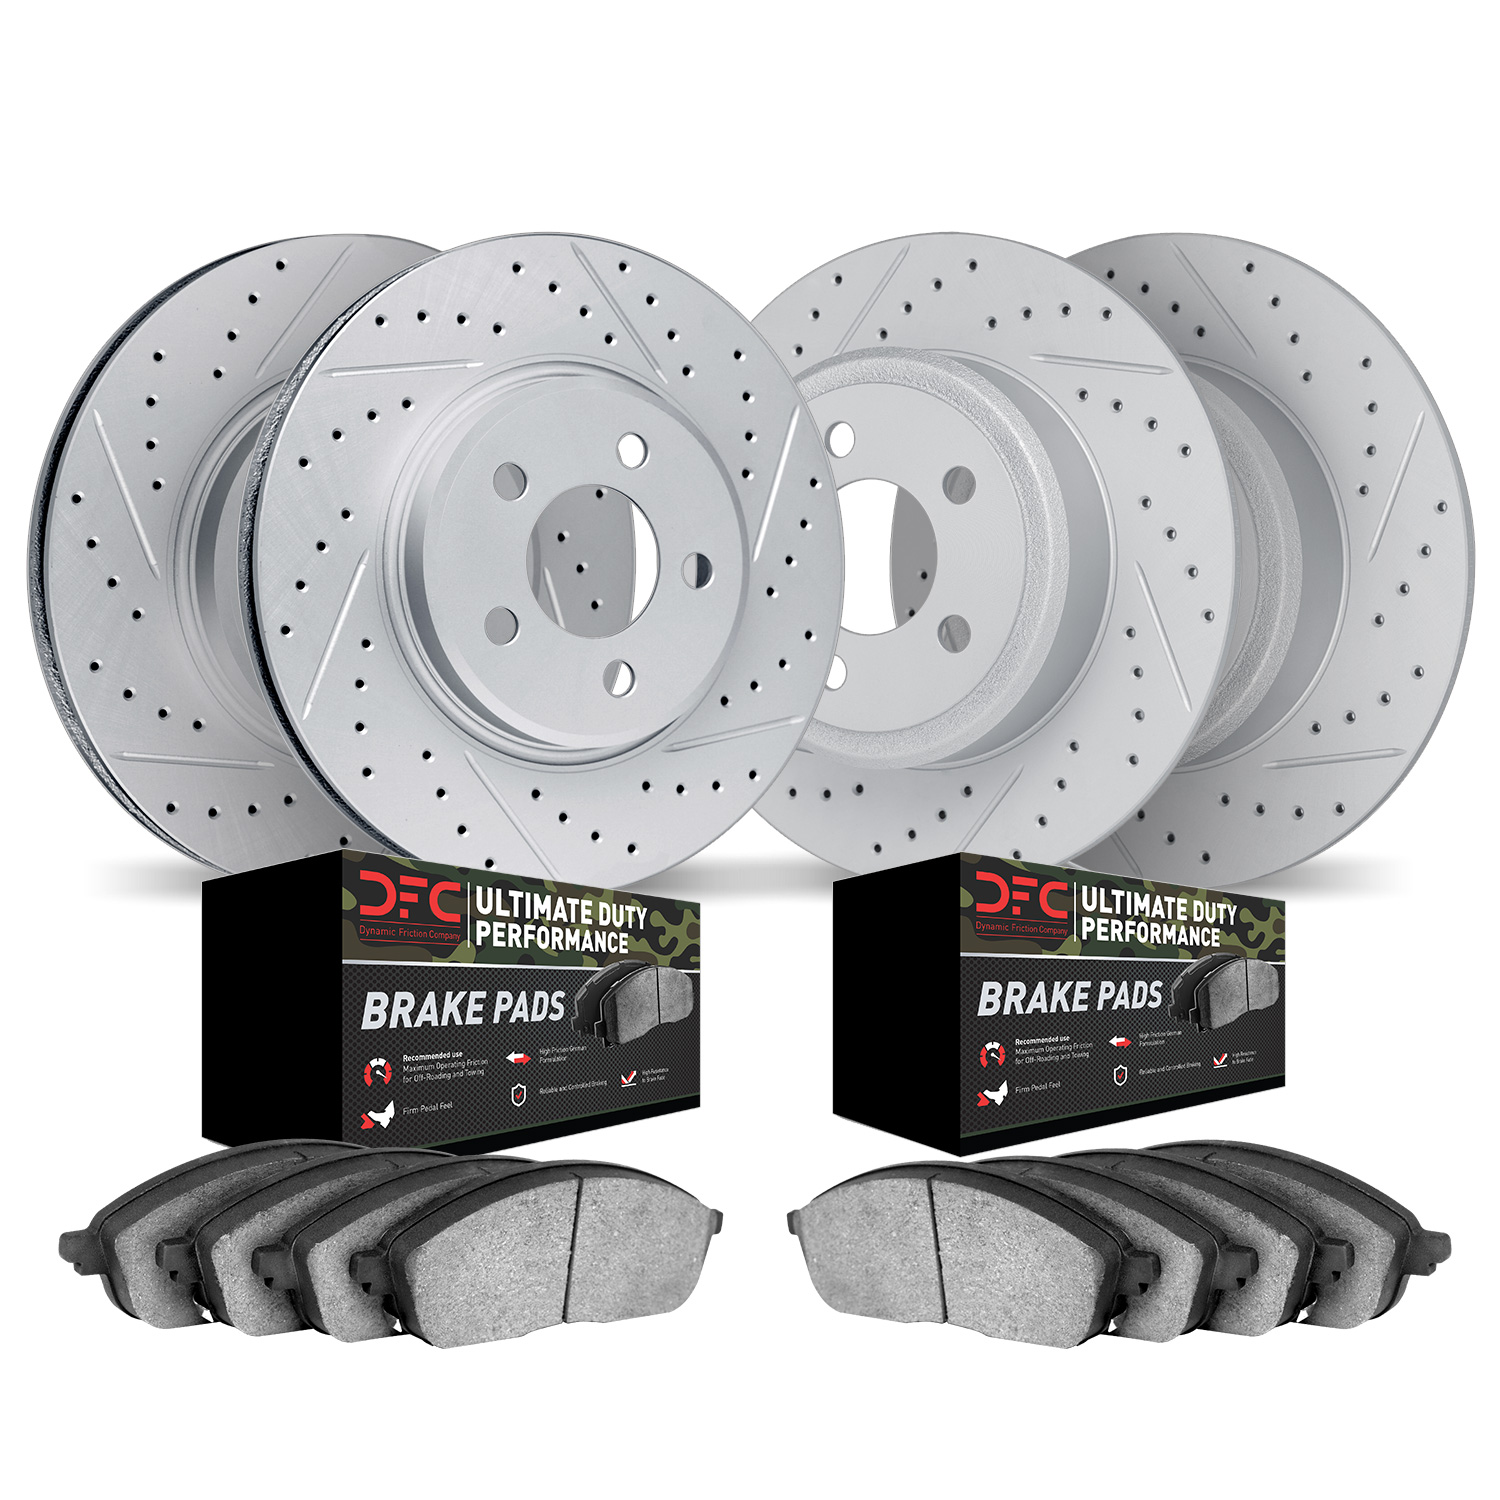 2404-42011 Geoperformance Drilled/Slotted Brake Rotors with Ultimate-Duty Brake Pads Kit, 1993-1994 Mopar, Position: Front and R